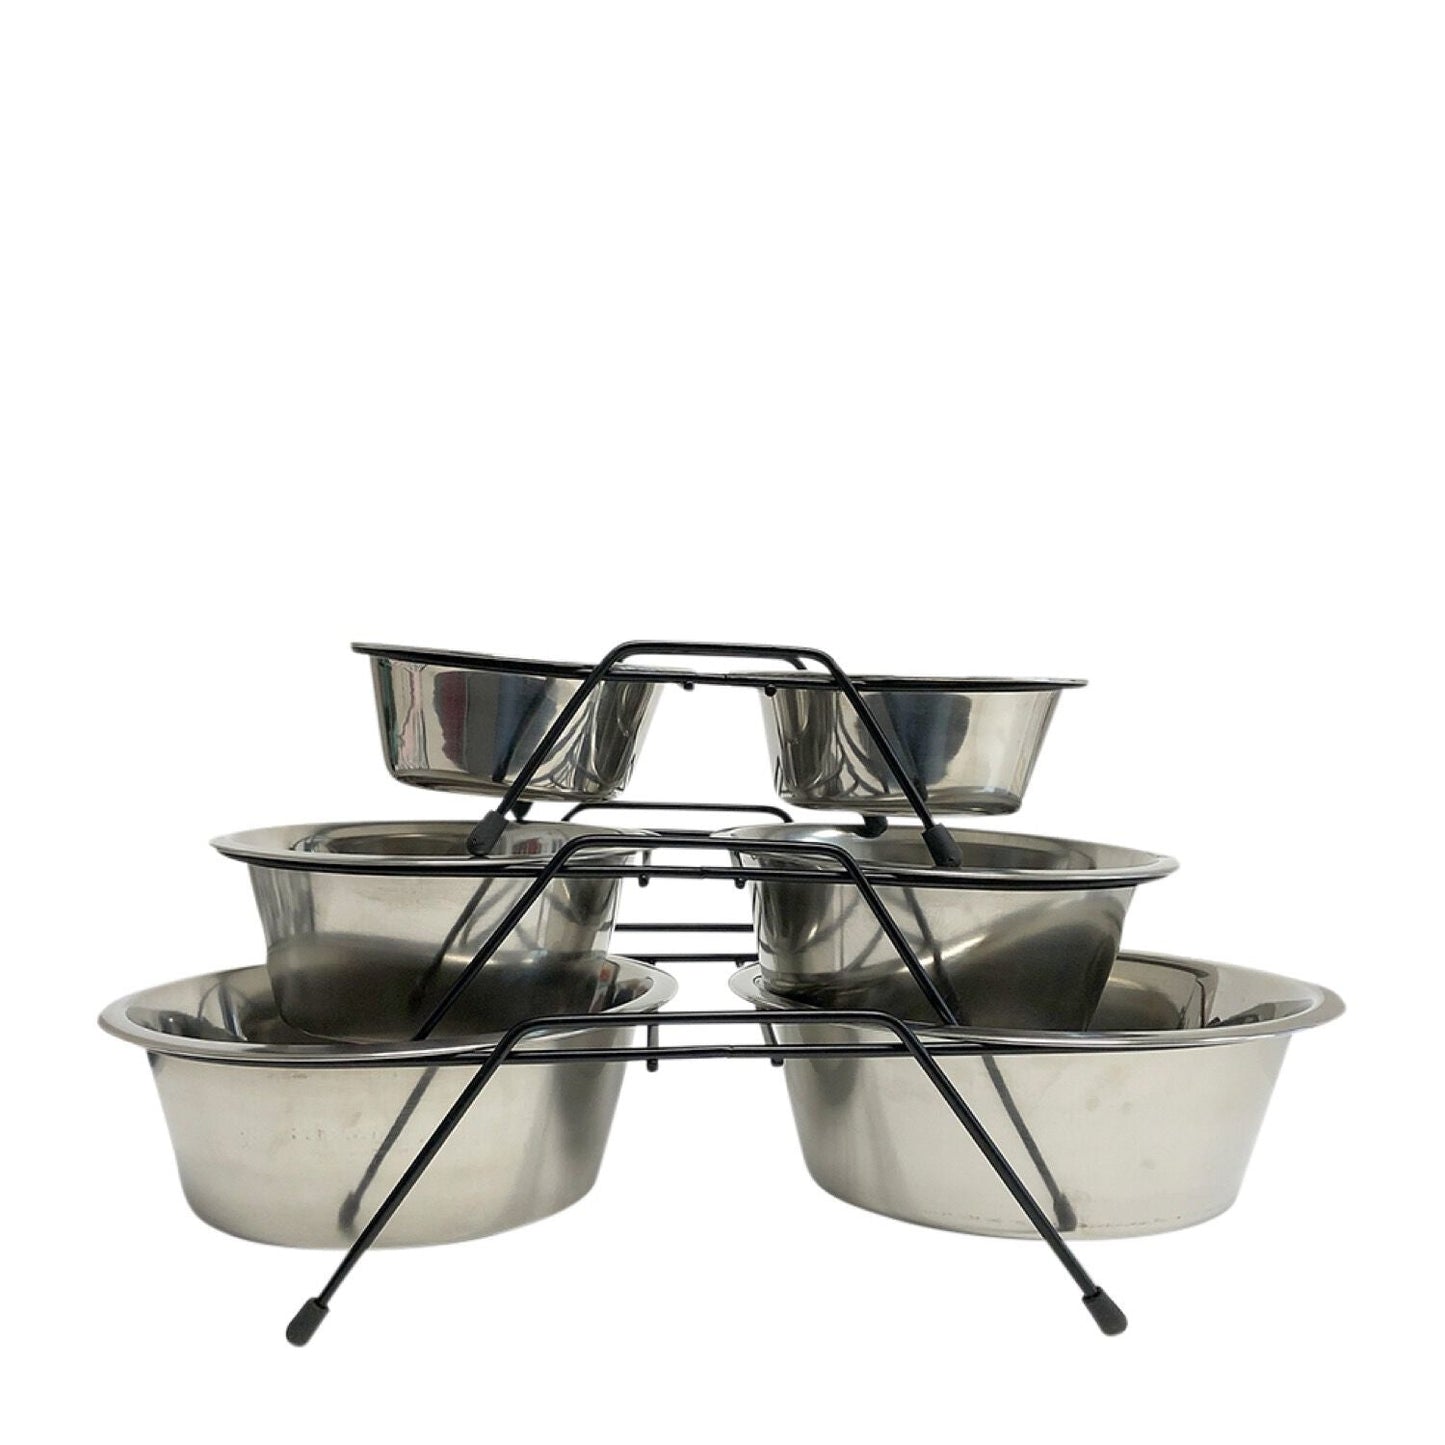 Double Stainless Steel Bowls with Rack